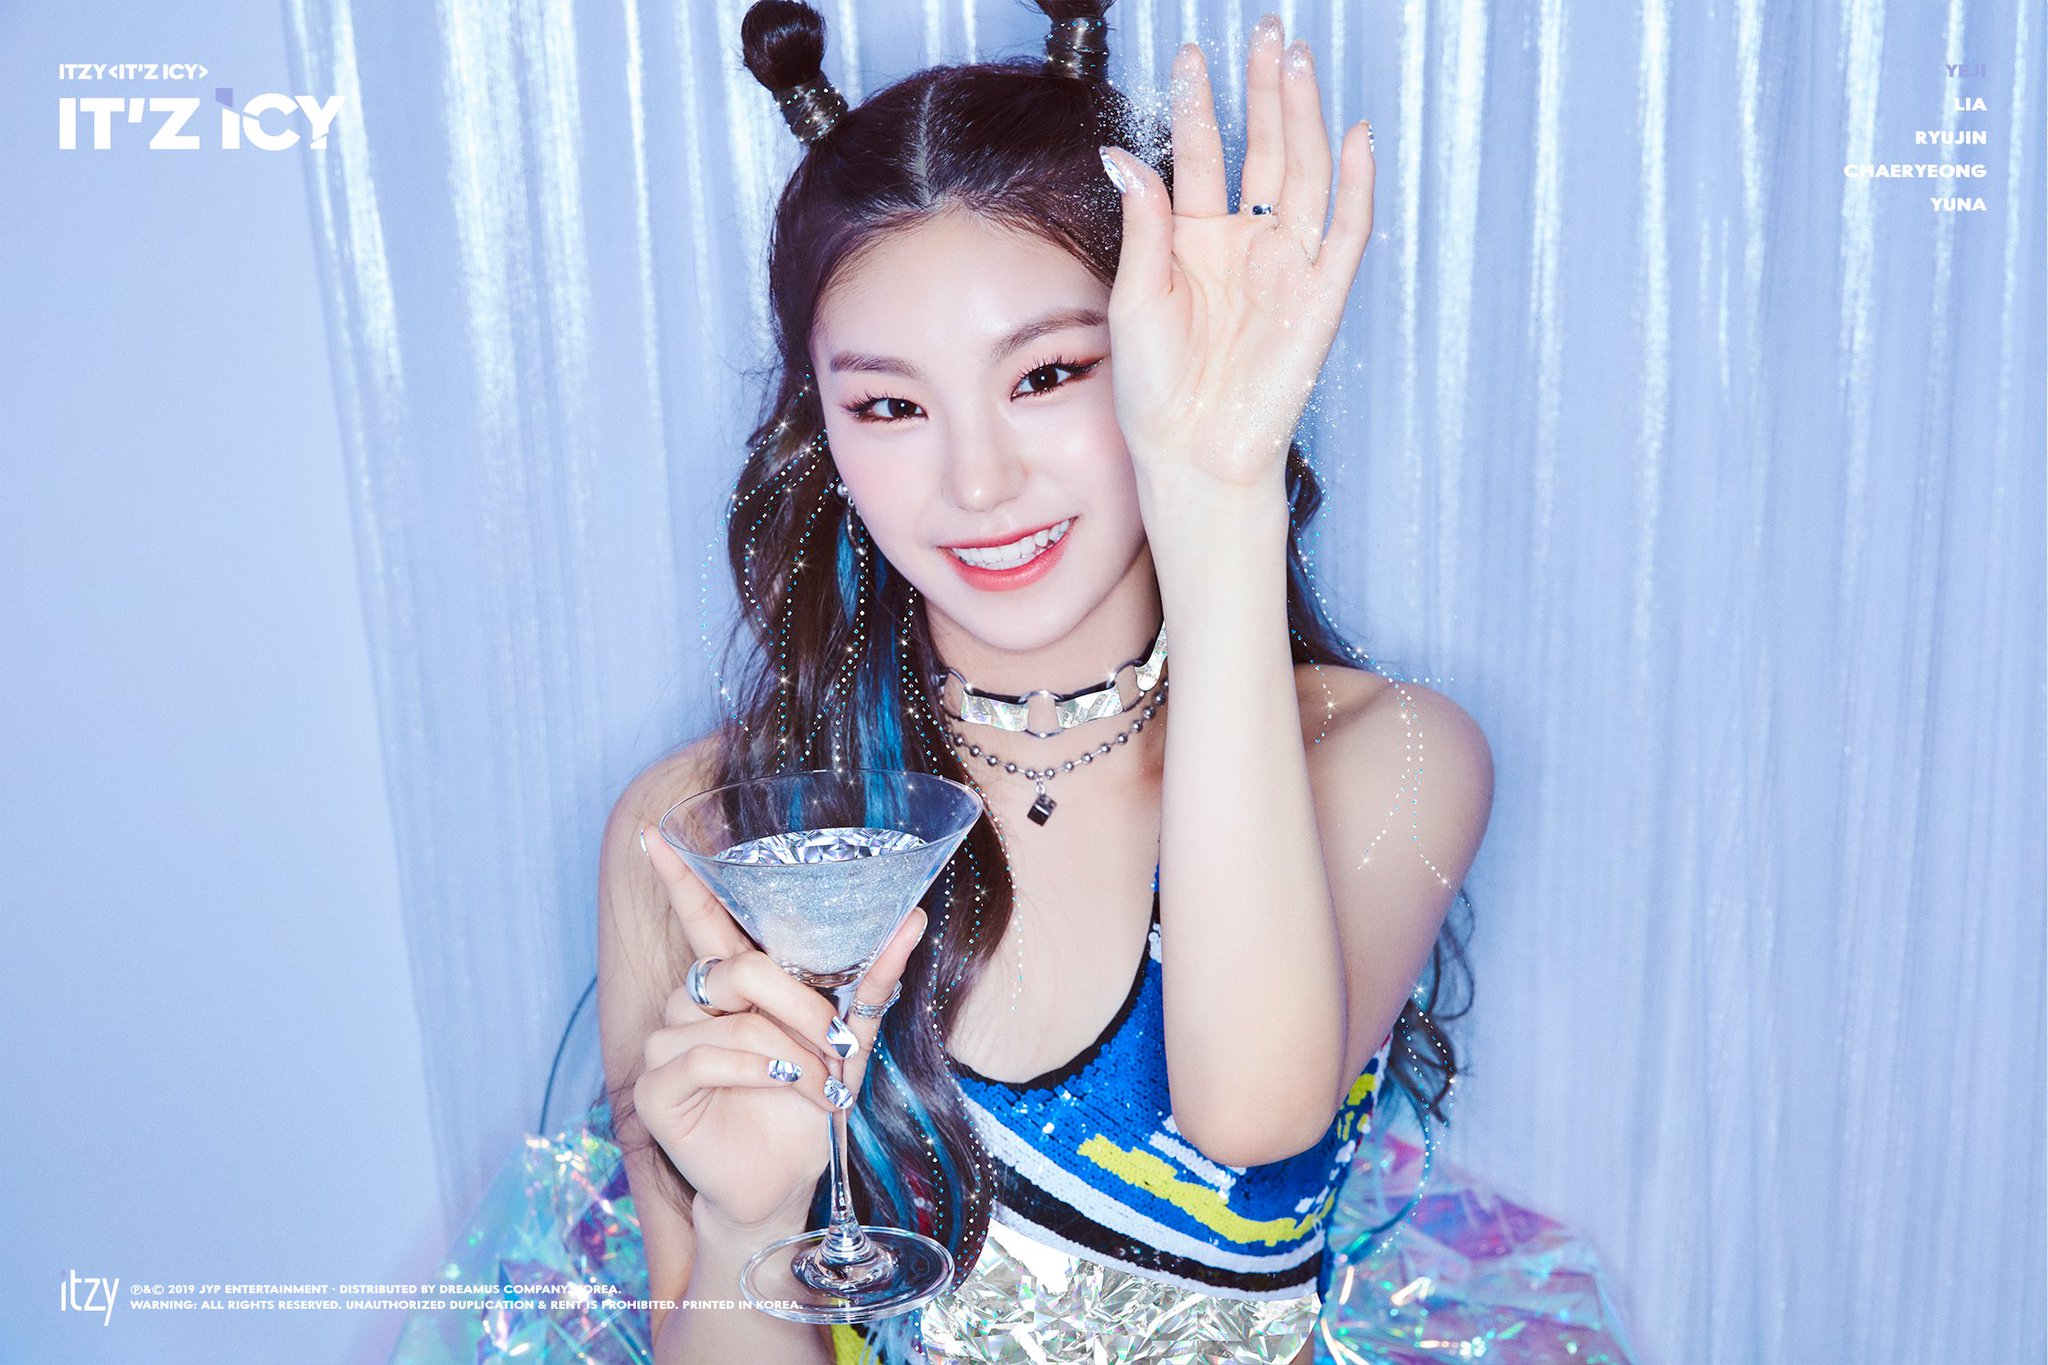 ITZY unveils teaser images for ITz ICY featuring 